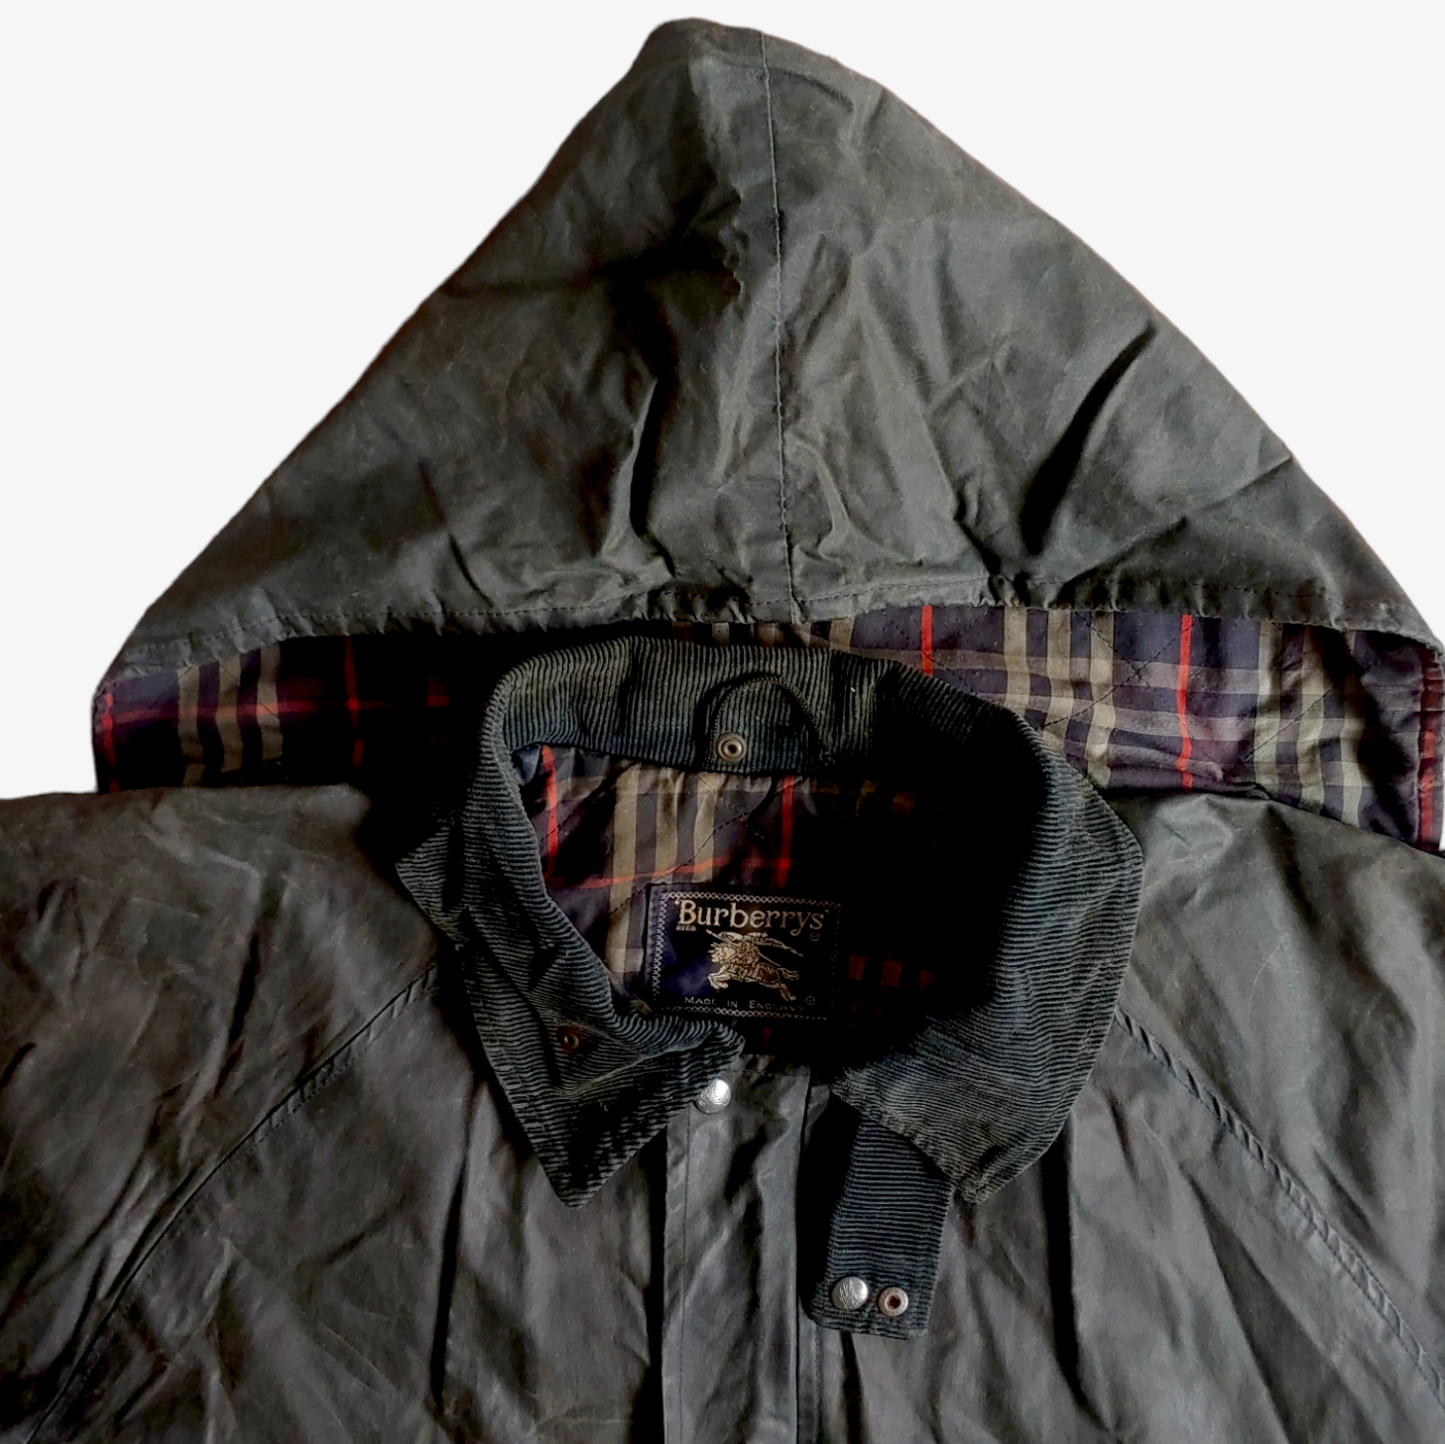 Vintage 80s Burberry Navy Waxed Jacket With Check Lining Hood - Casspios Dream